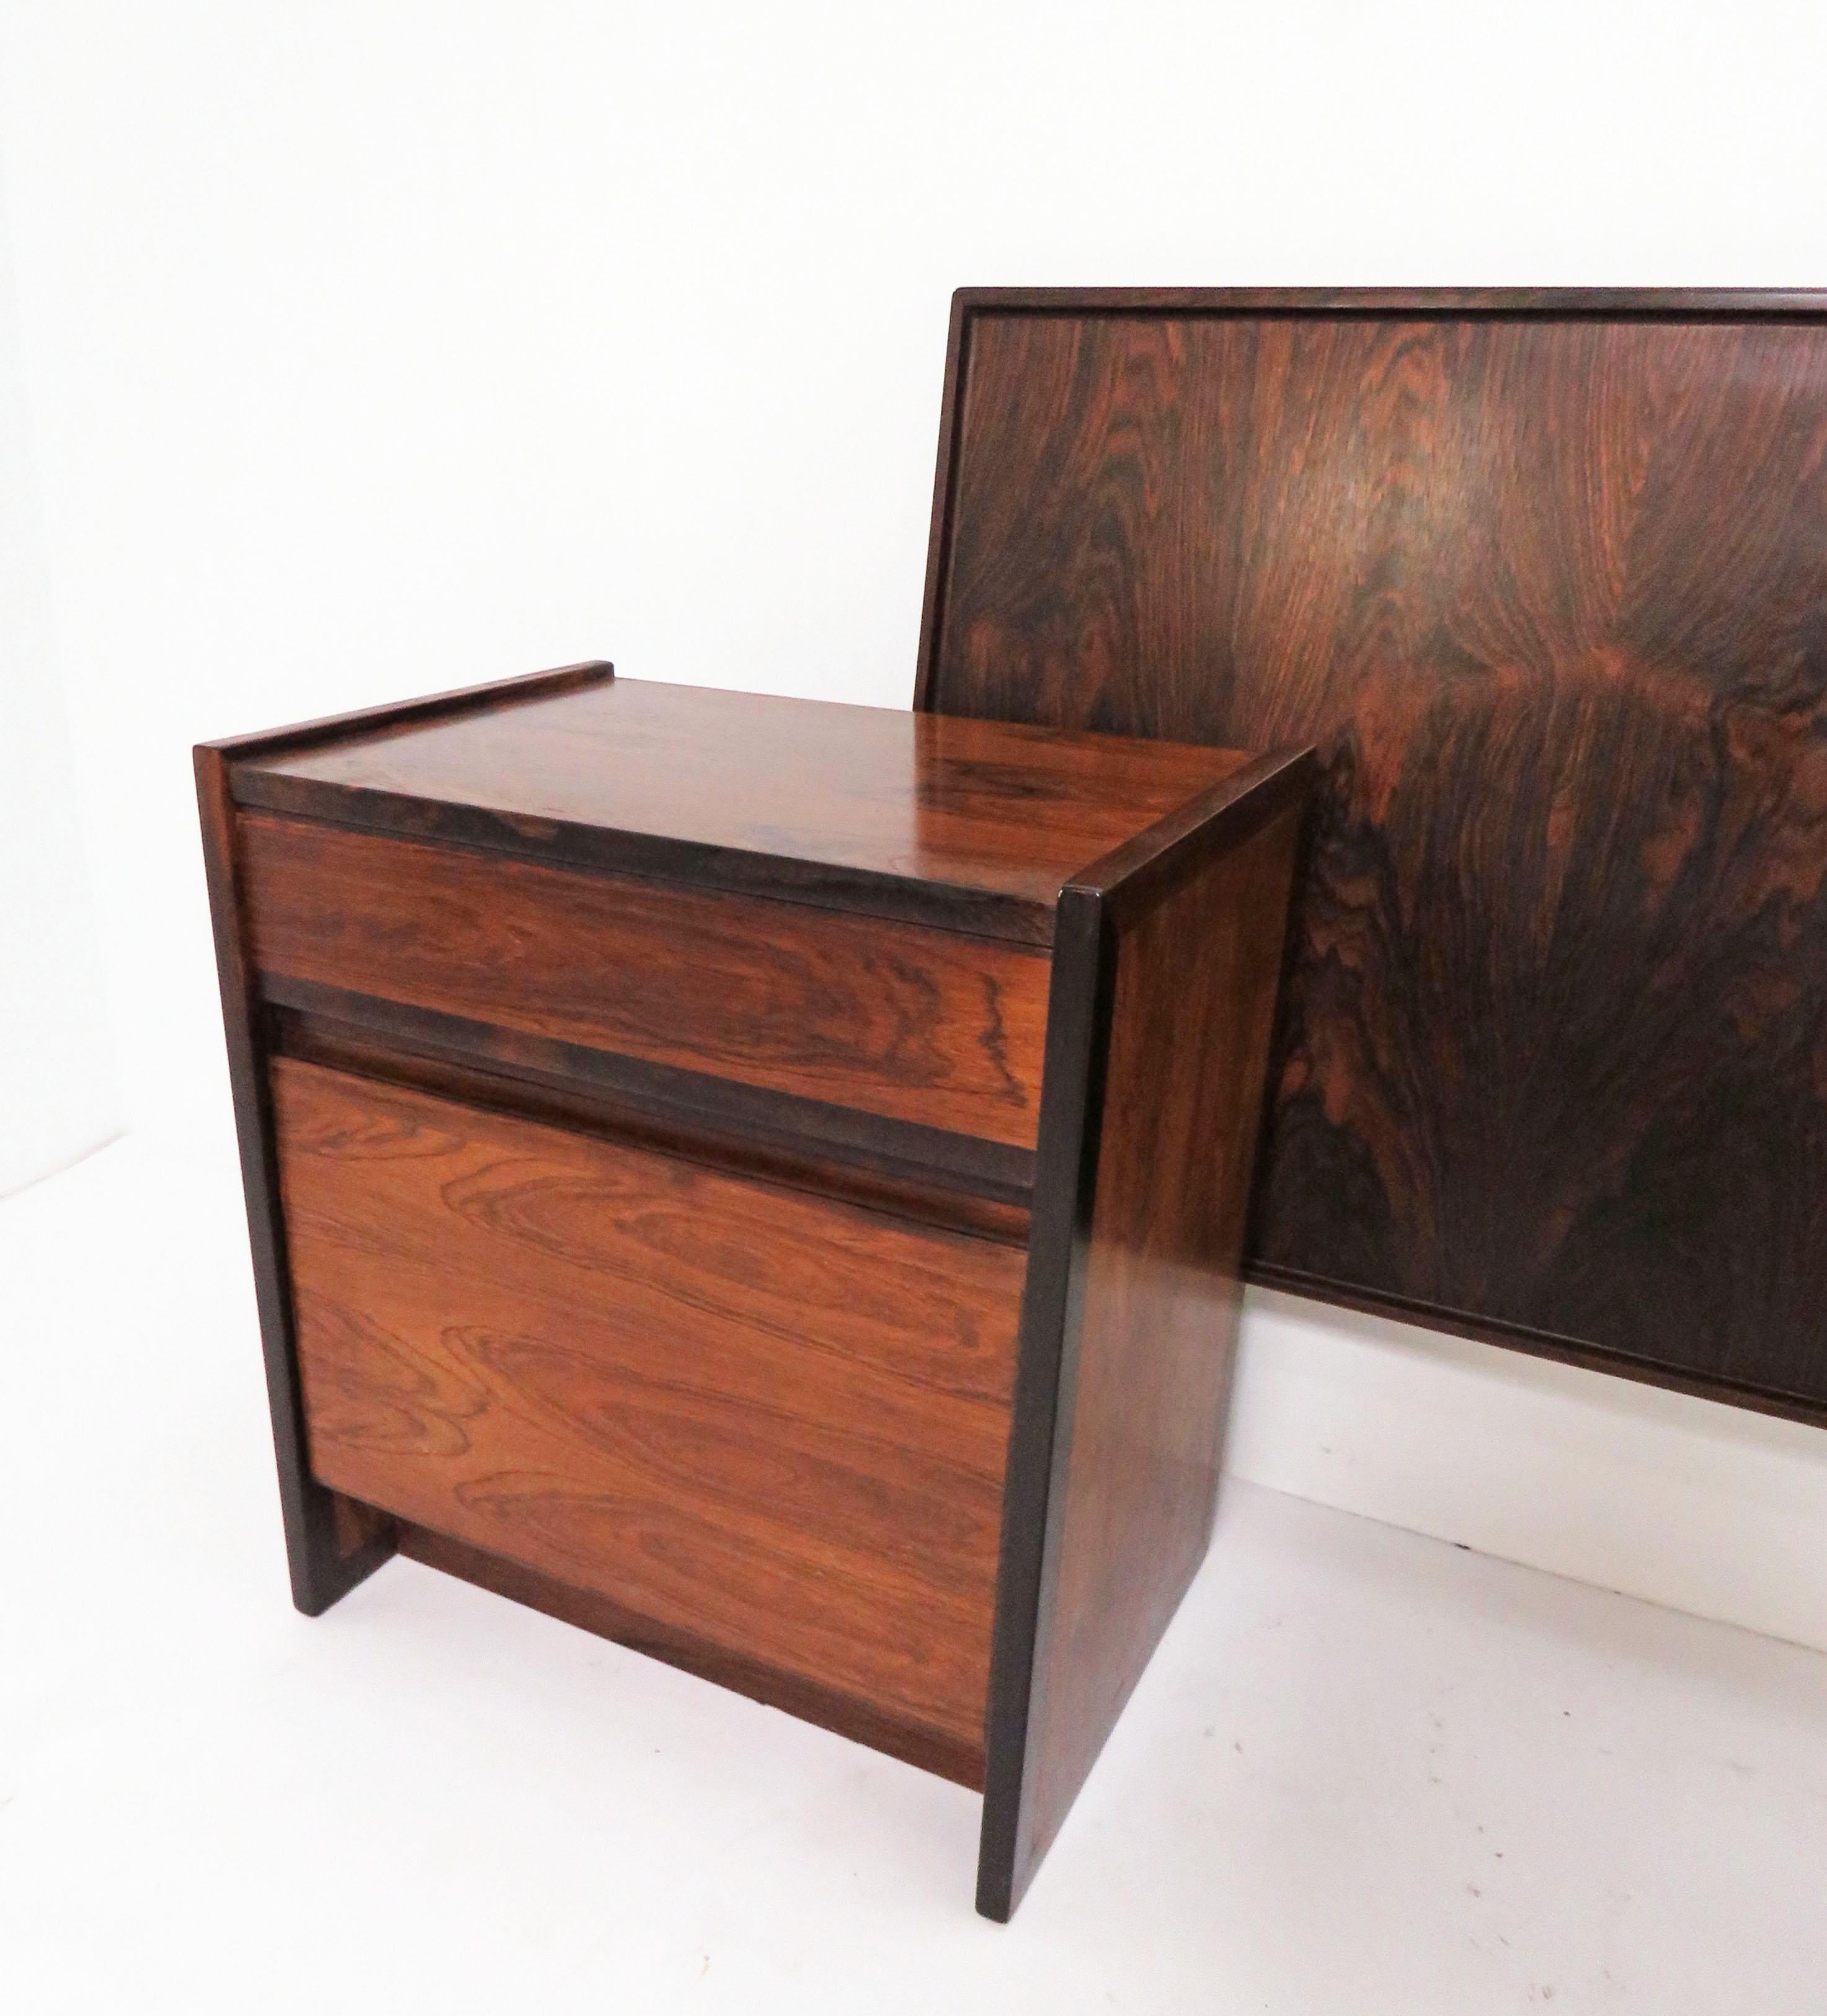 Pair of rosewood night stands and matching king size headboard, circa 1970s. Night stands with drop down door fronts, and single drawer above. Headboard features book matched grain.

Headboard measures 81 5/8